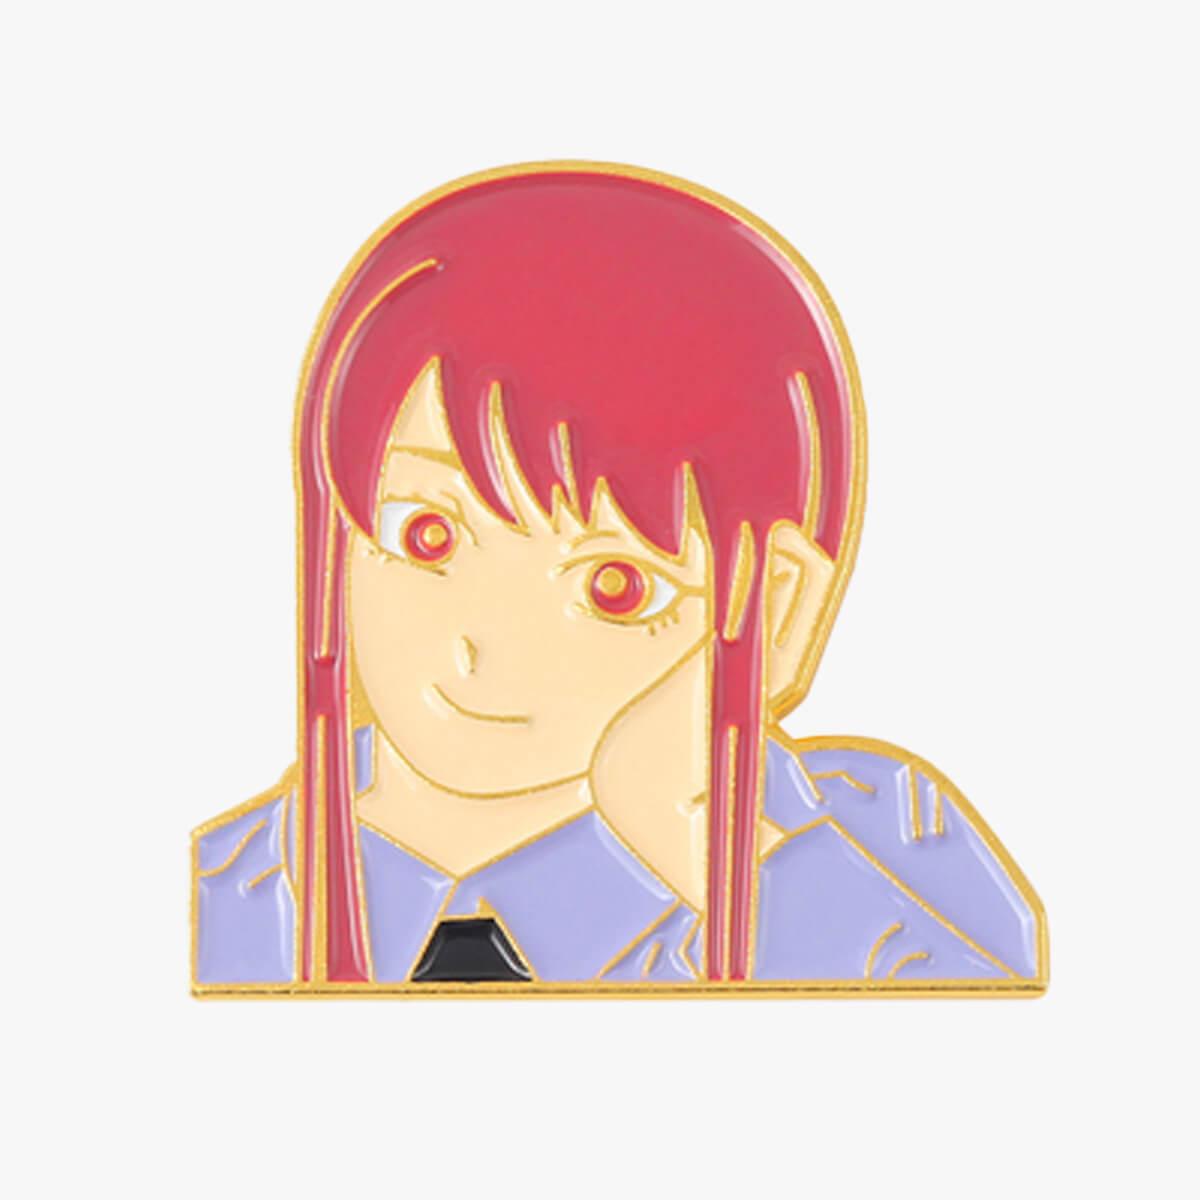 Chainsaw Man Enamel Pins Anime Aesthetic - Aesthetic Clothes Shop